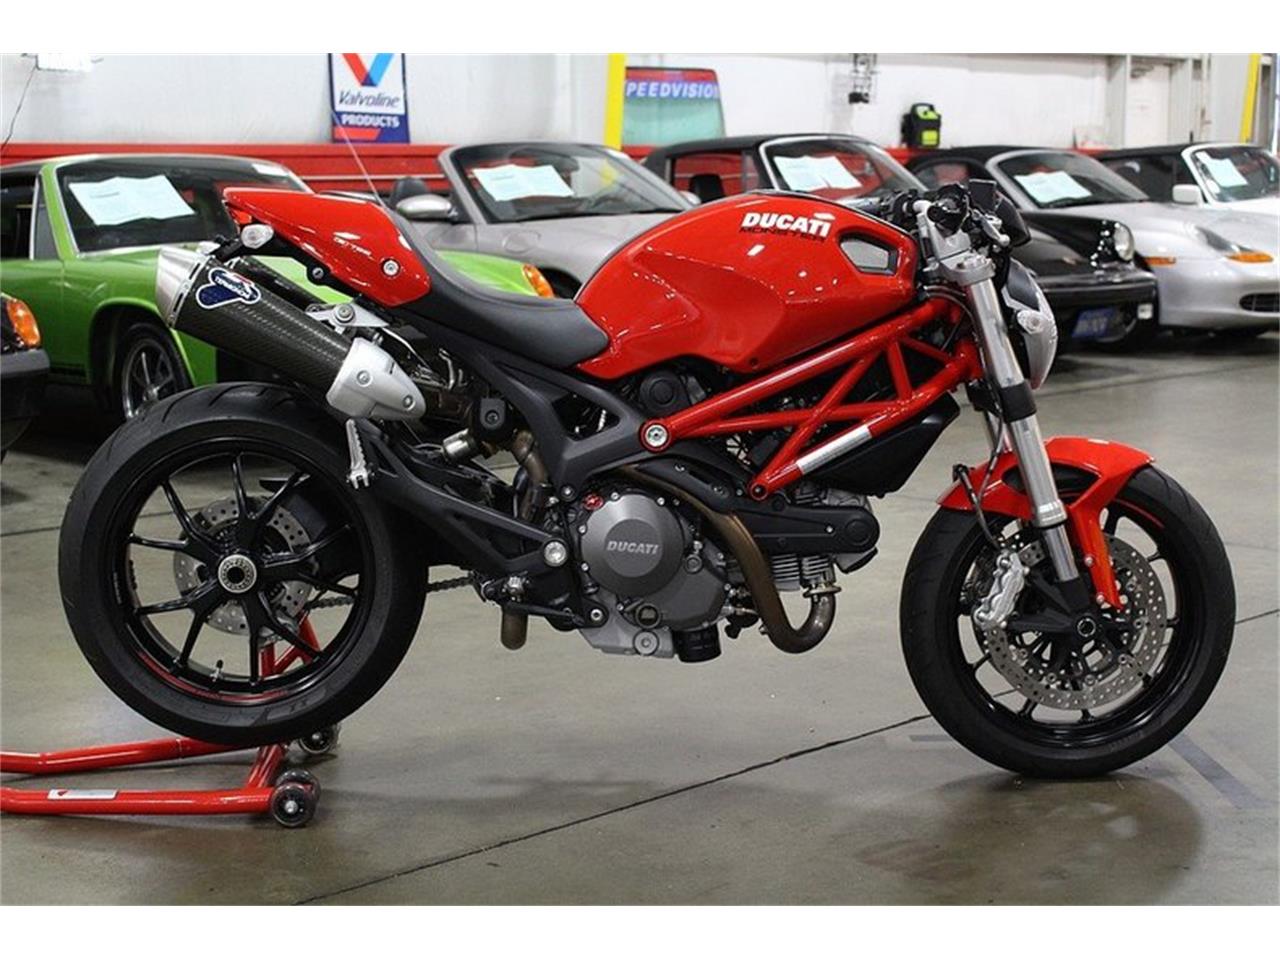 2012 Ducati Monster 796 ABS for Sale | ClassicCars.com ...